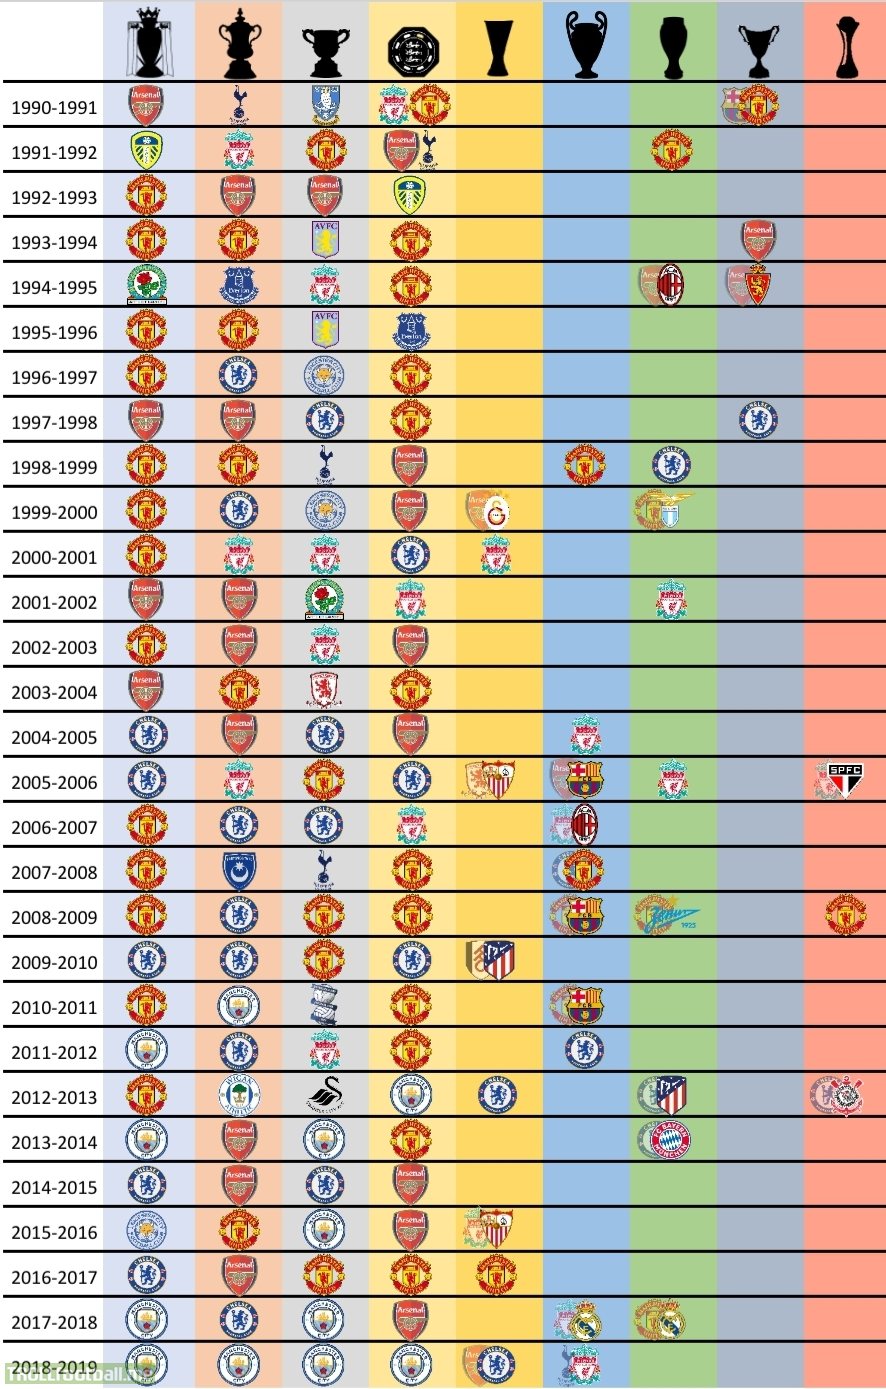 Little graphic I made showing major trophies winner over the last 30 years (English clubs)